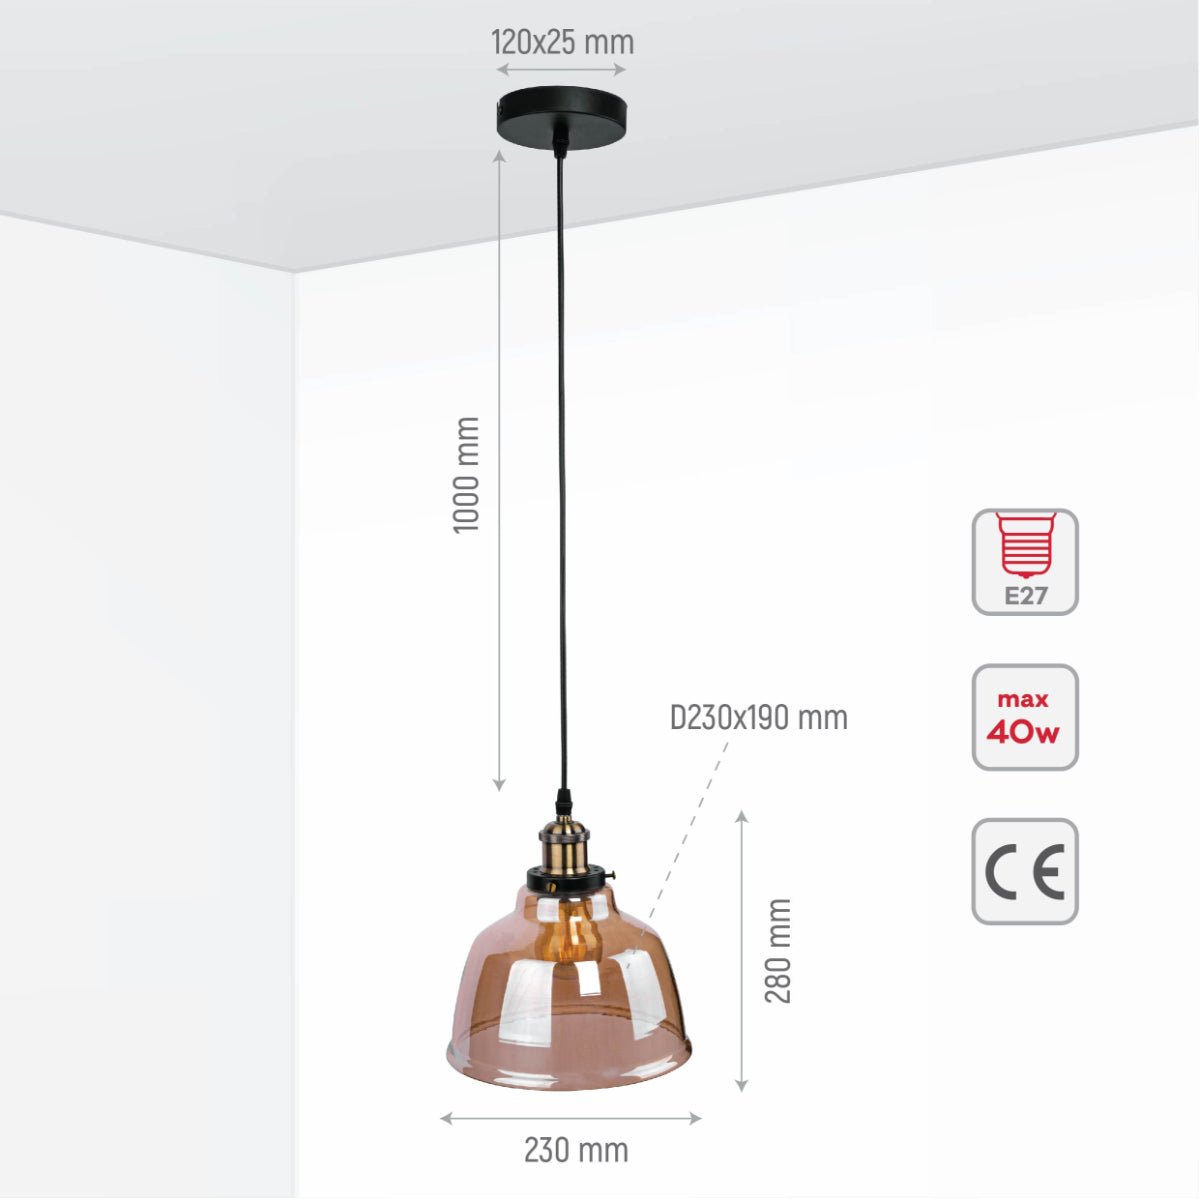 Size and specs of Amber Glass Dome Pendant Ceiling Light with E27 | TEKLED 150-17804